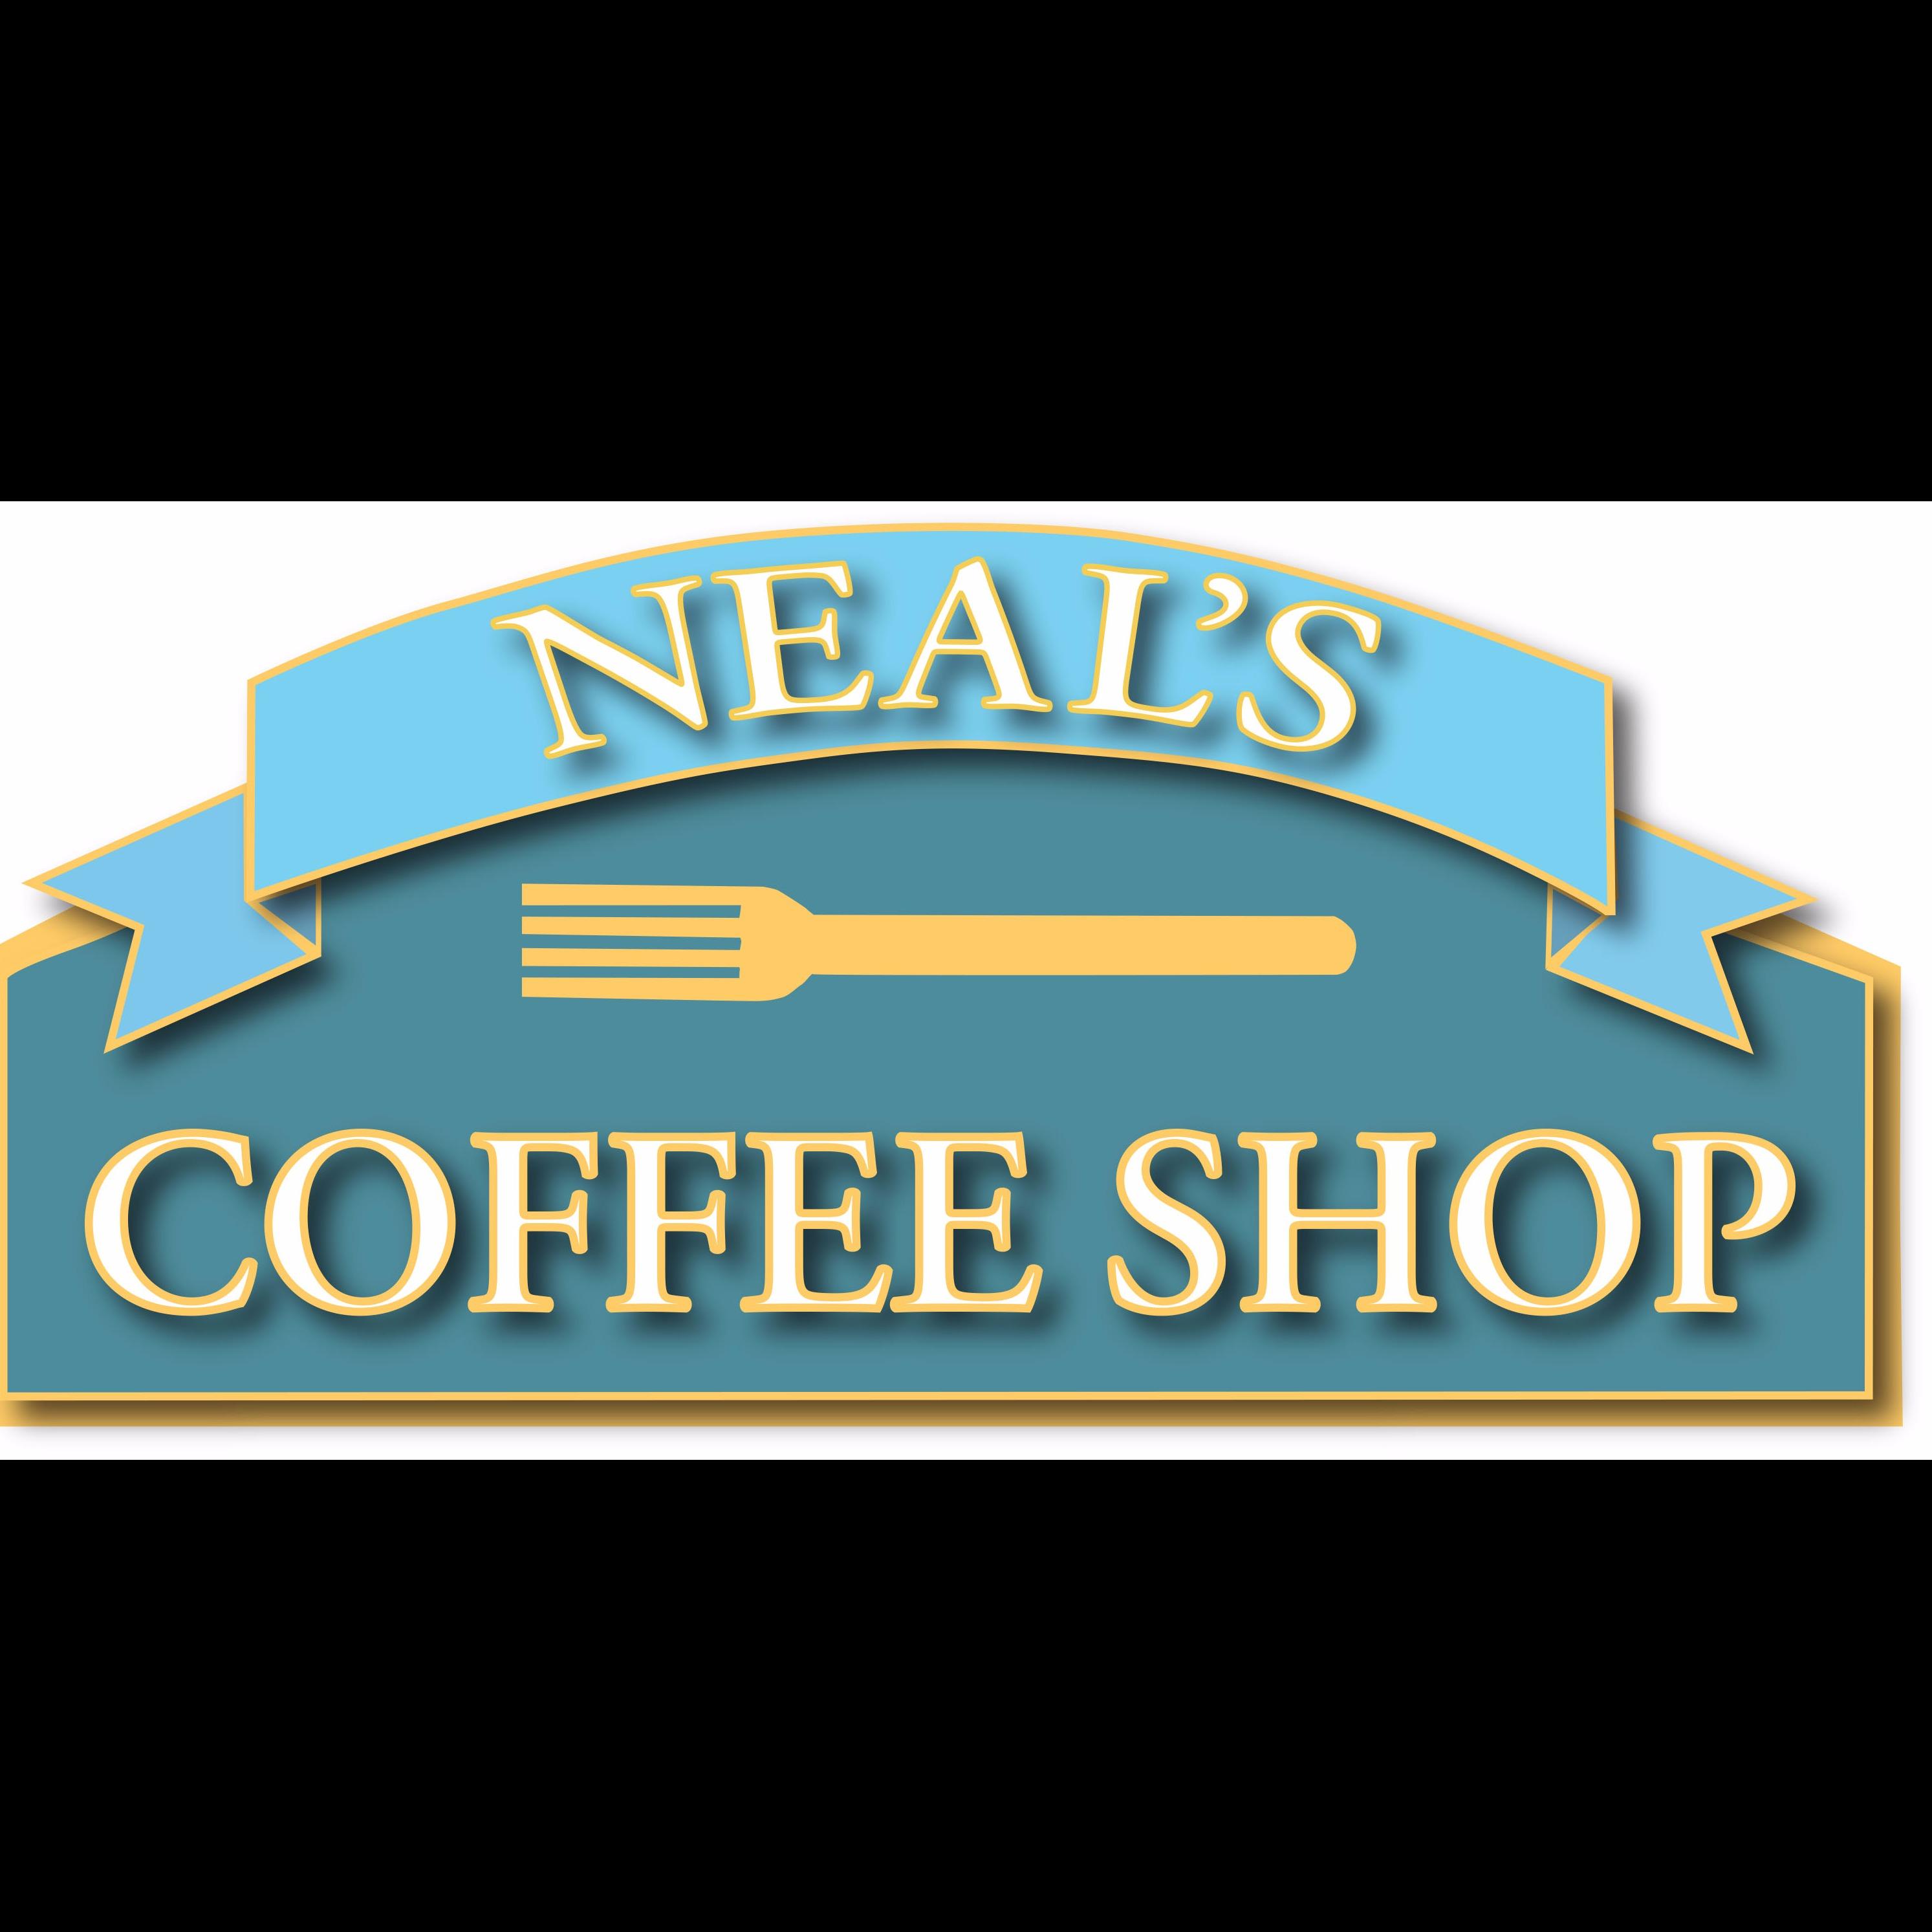 Neal's Coffee Shop Coupons near me in Burlingame, CA 94010 ...